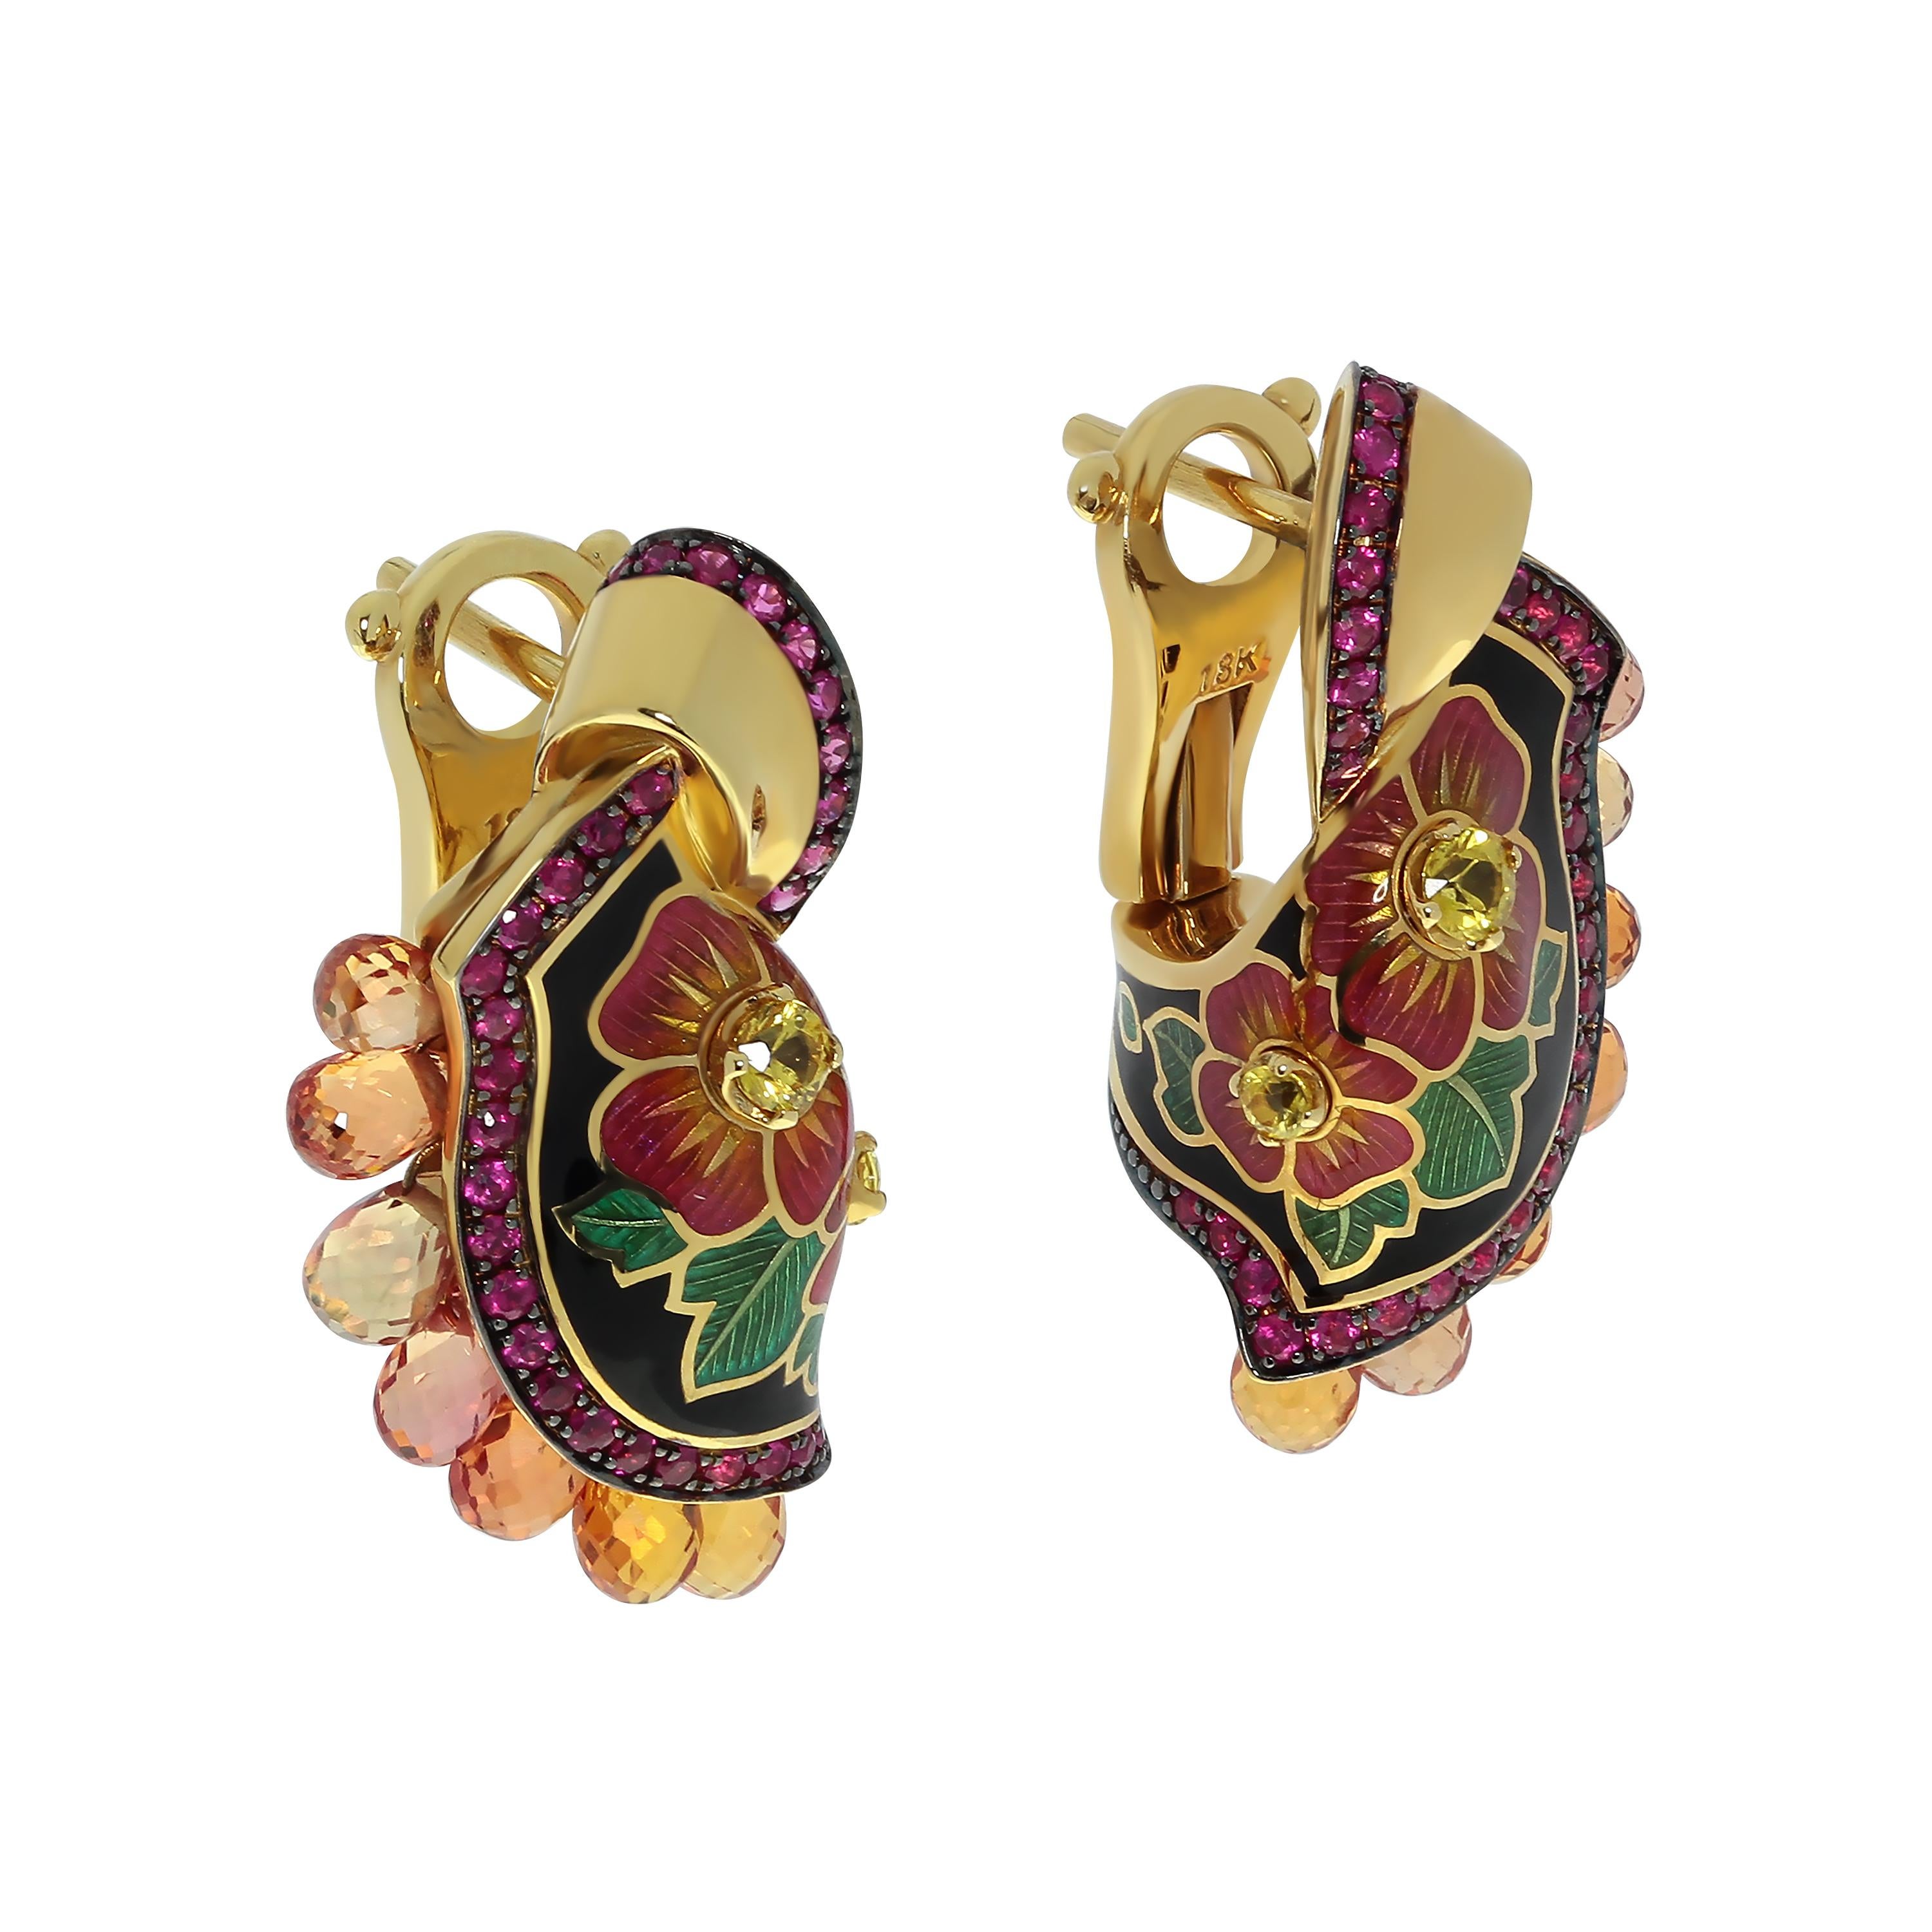 Sapphire Ruby  Enamel A'la Russe Small Earrings
What do you know about Pavlovo Posad shawls? This is a large part of Russian culture, which originated in the 17th century. They are large patterned scarves, which are usually presented as a gift to